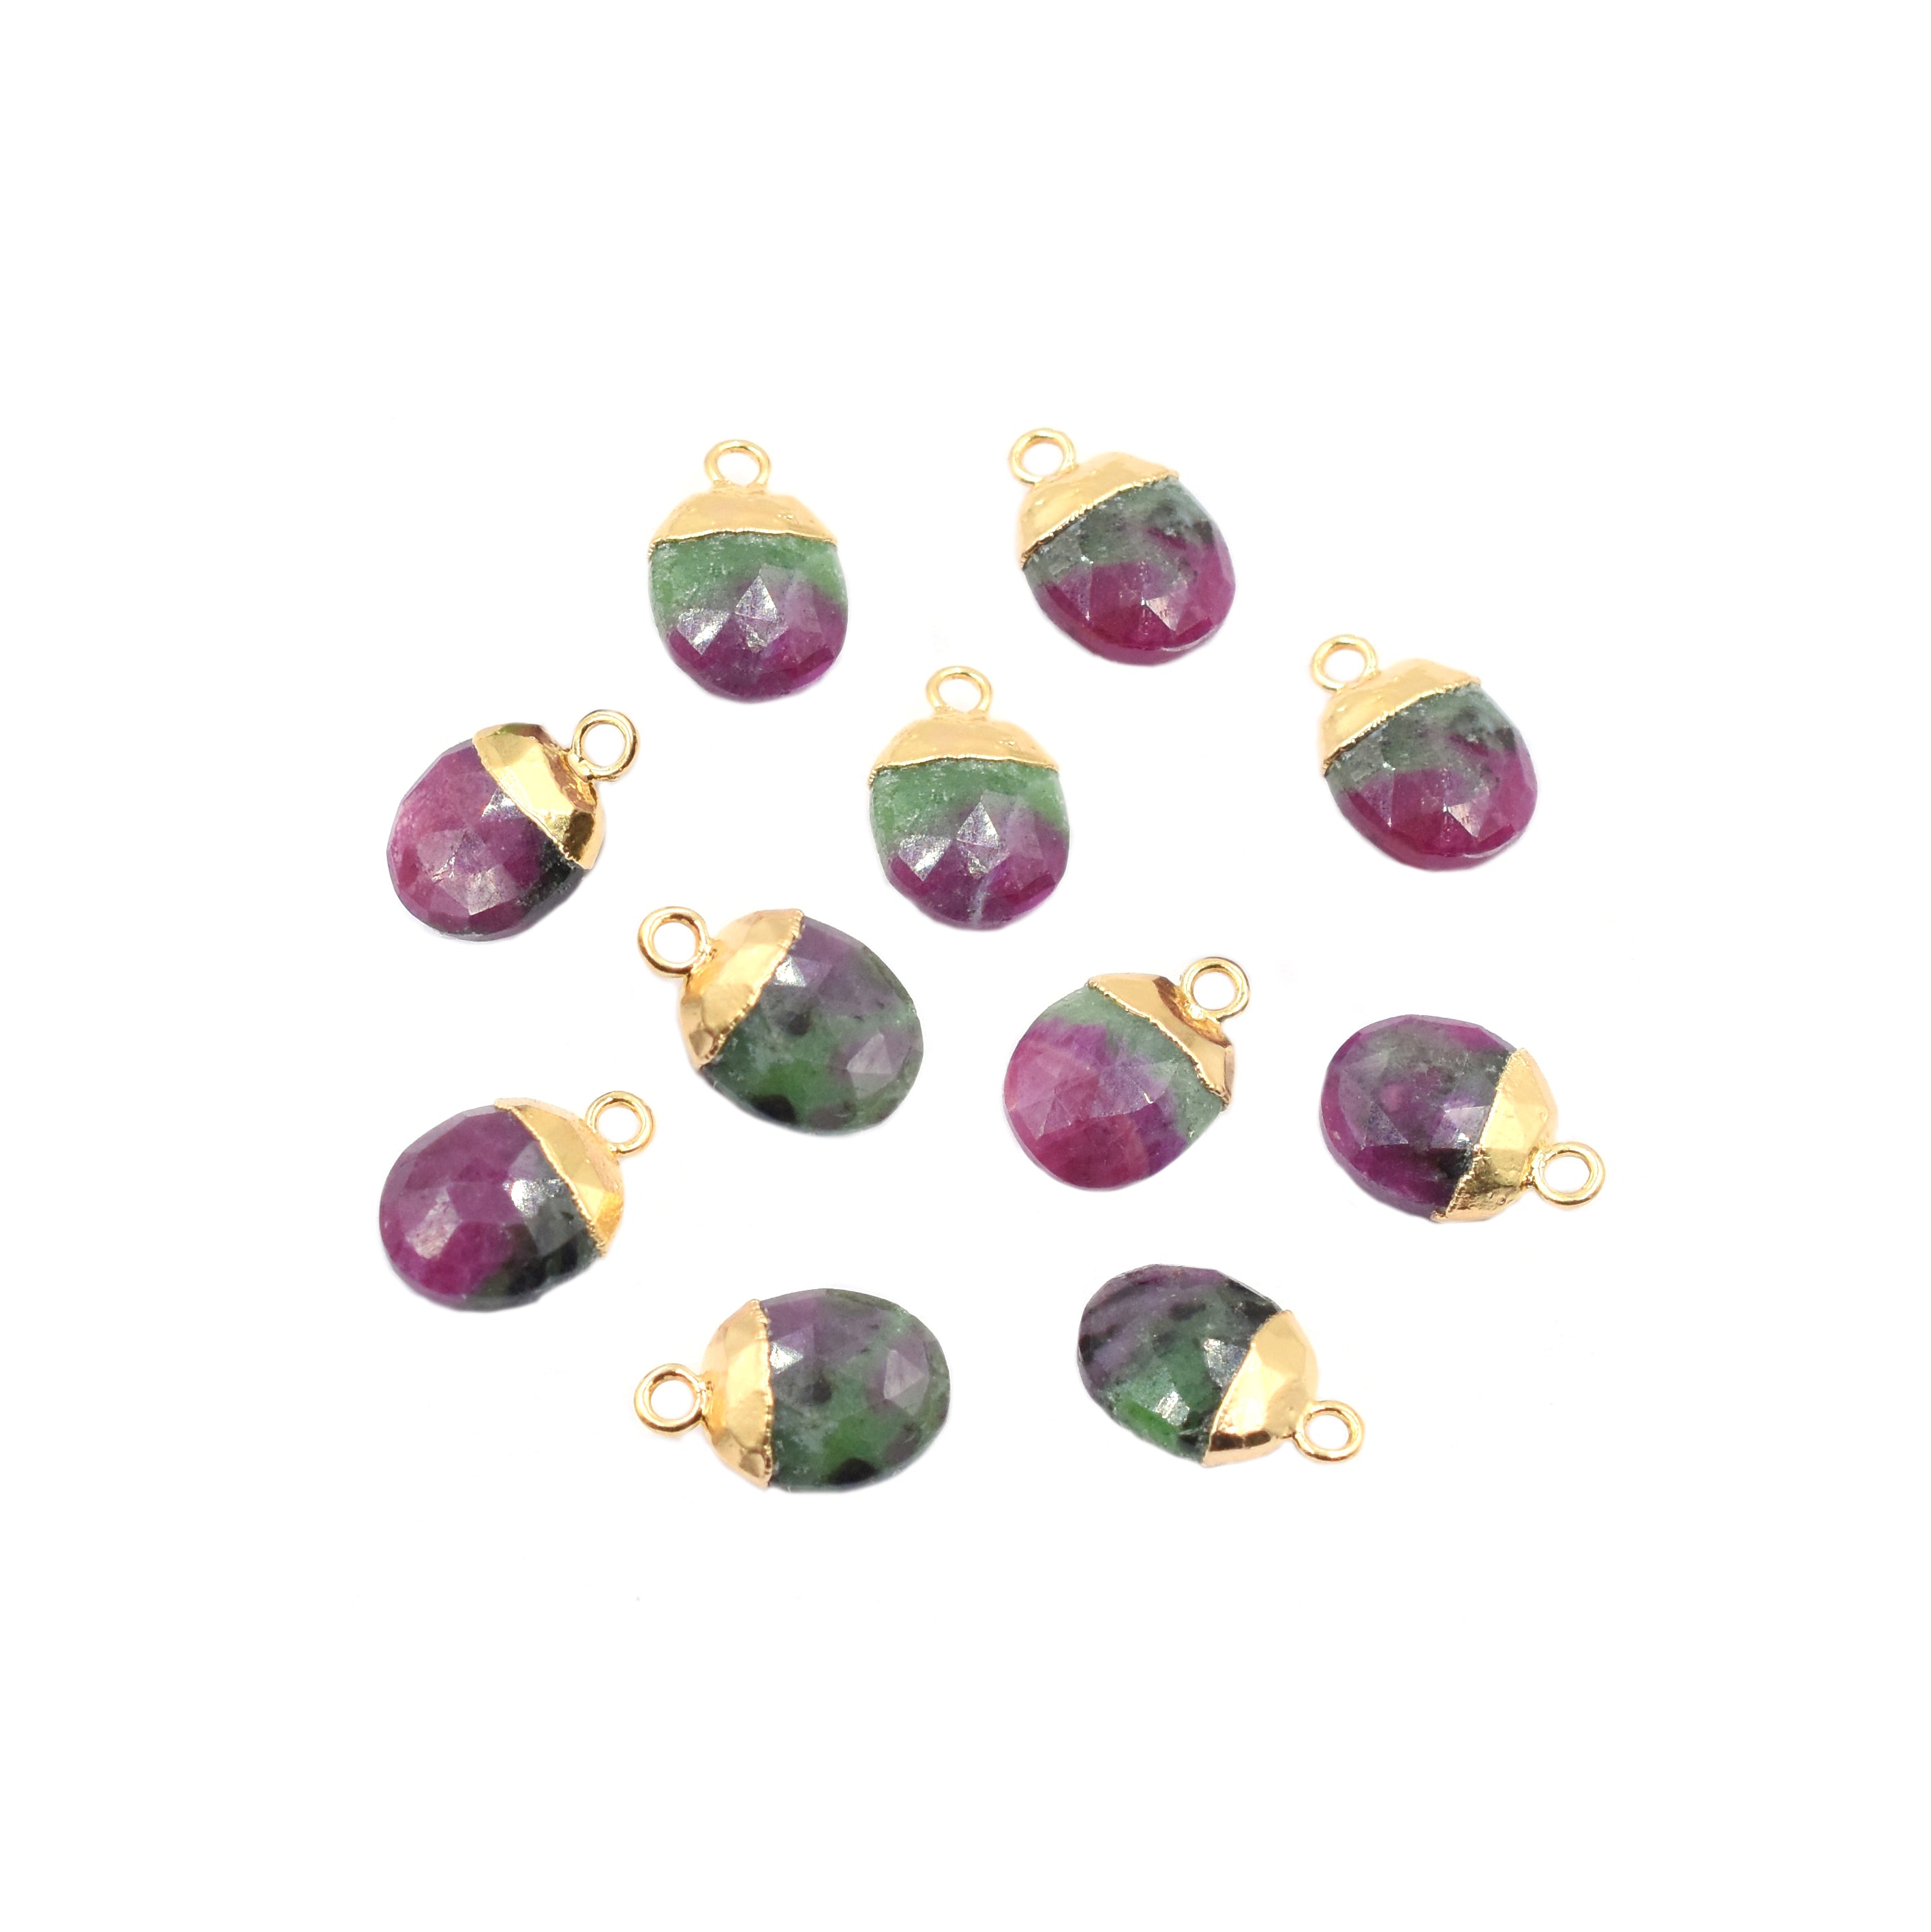 Ruby Zoisite 10X8 MM Oval Shape Gold Electroplated Pendant (Set Of 2 Pcs)